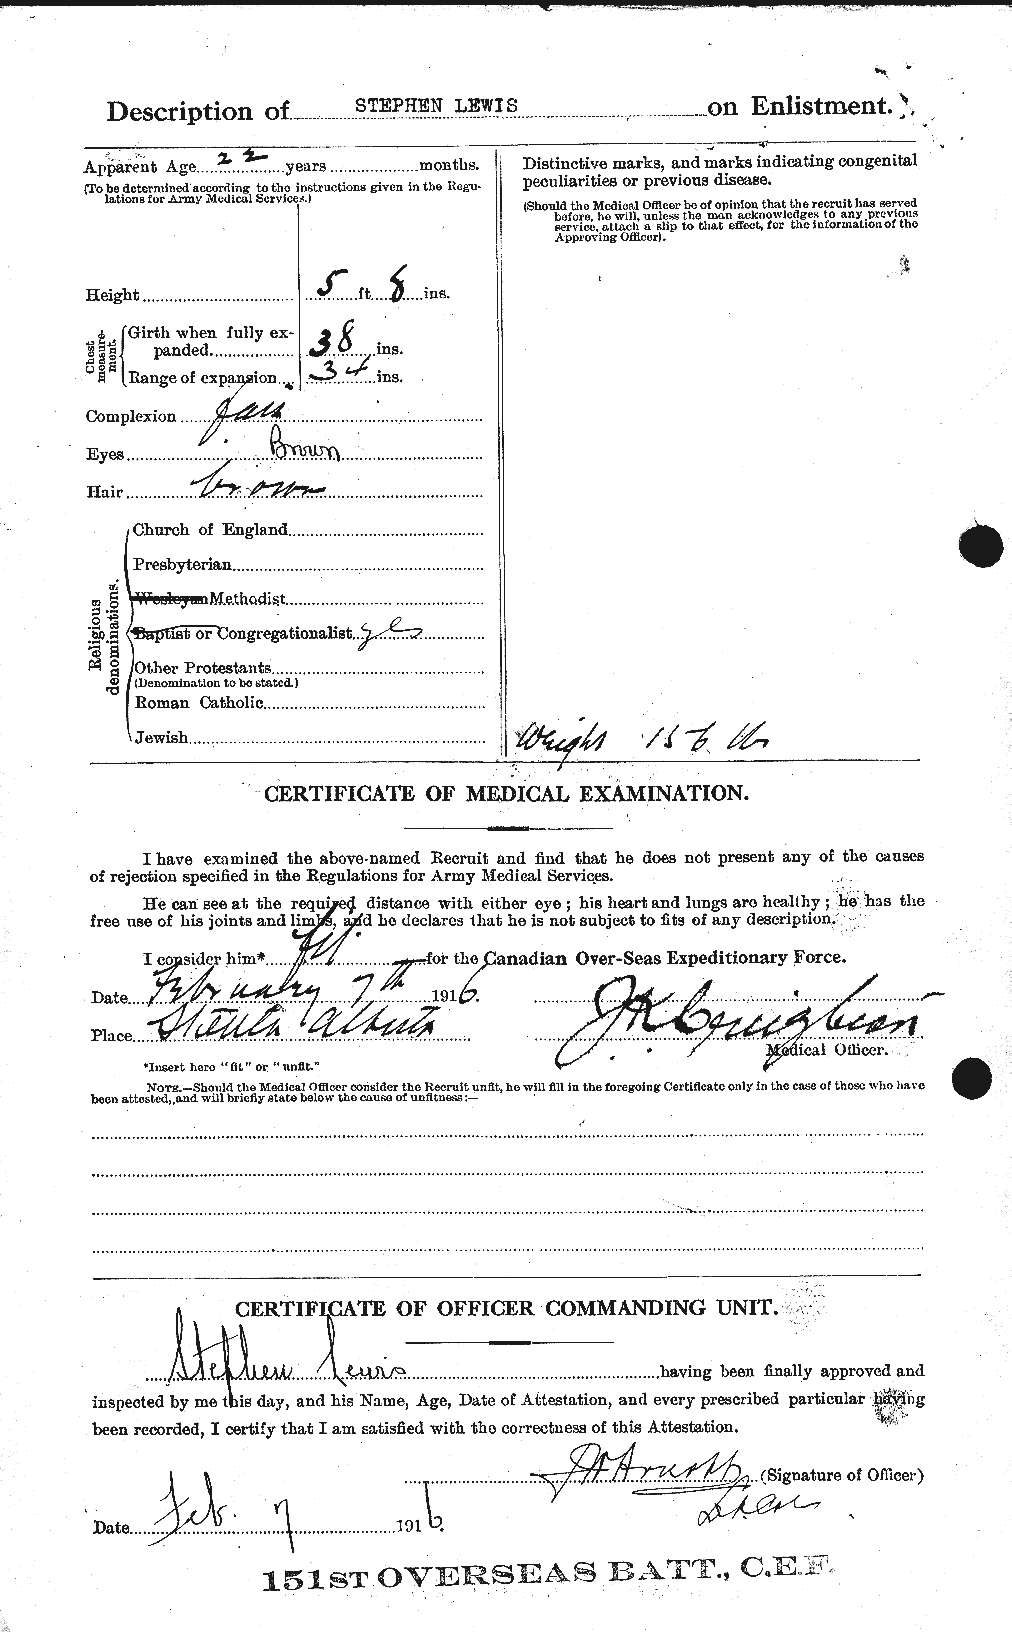 Personnel Records of the First World War - CEF 463945b